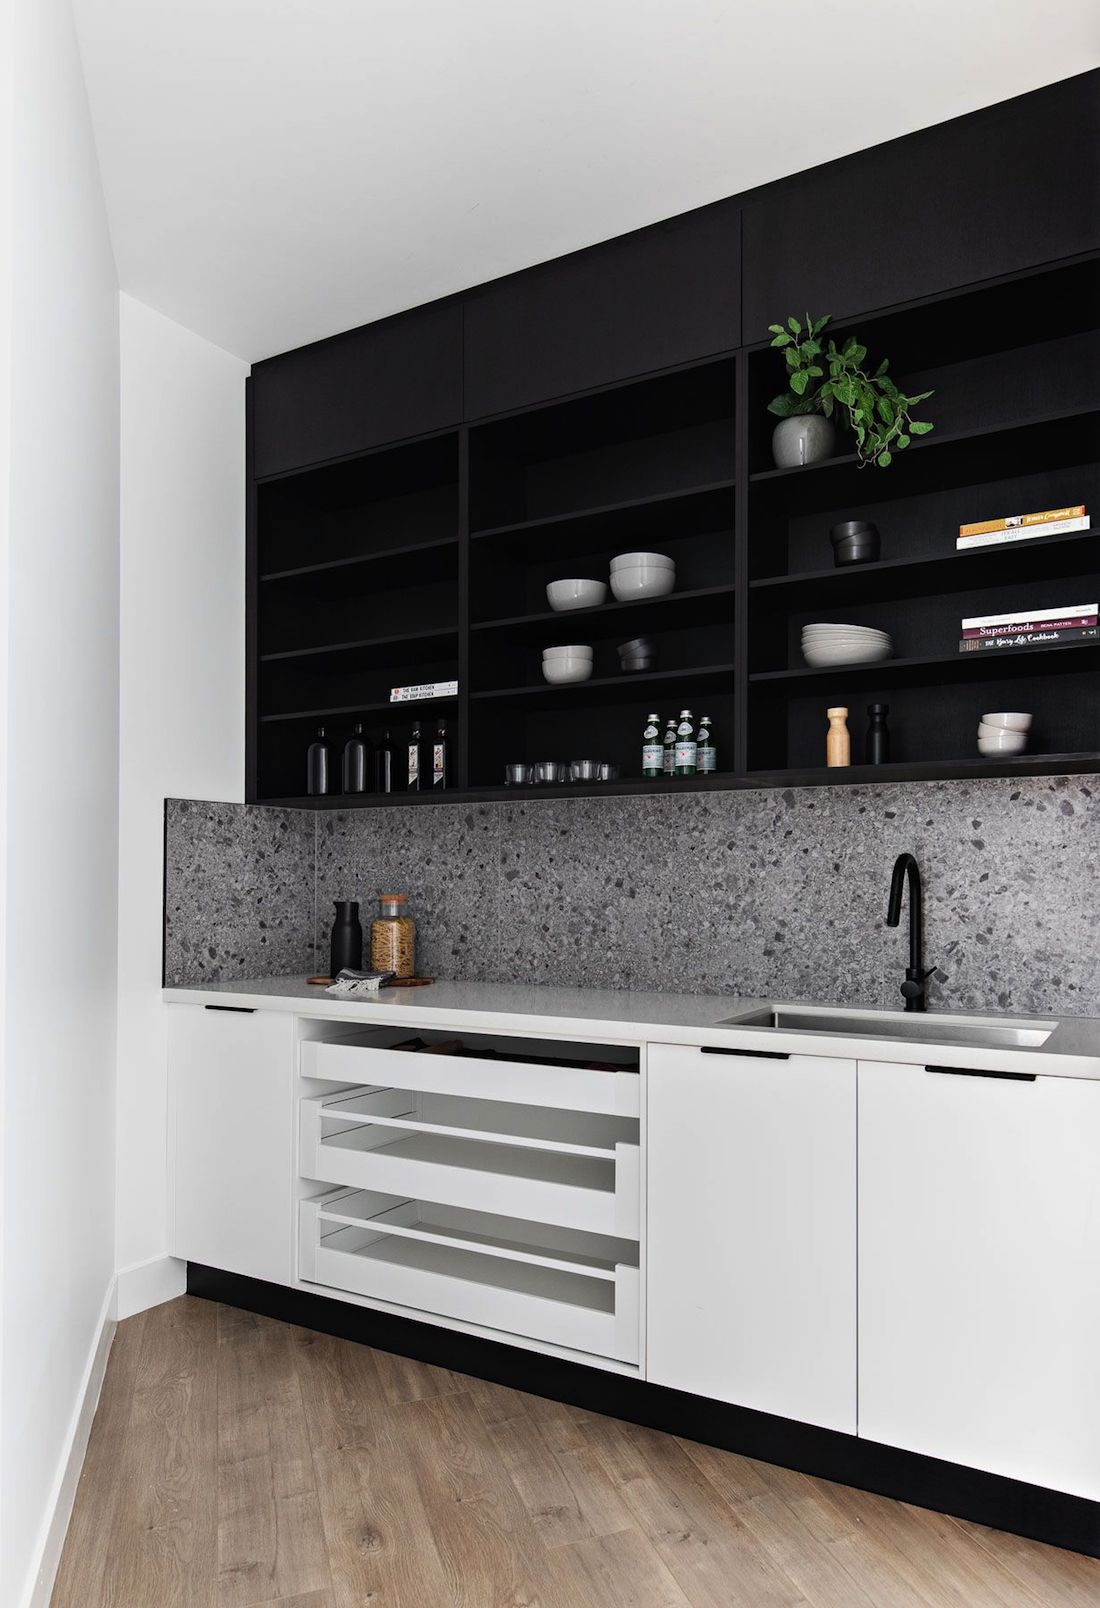 Black kitchen with open shelving and white cabinetry